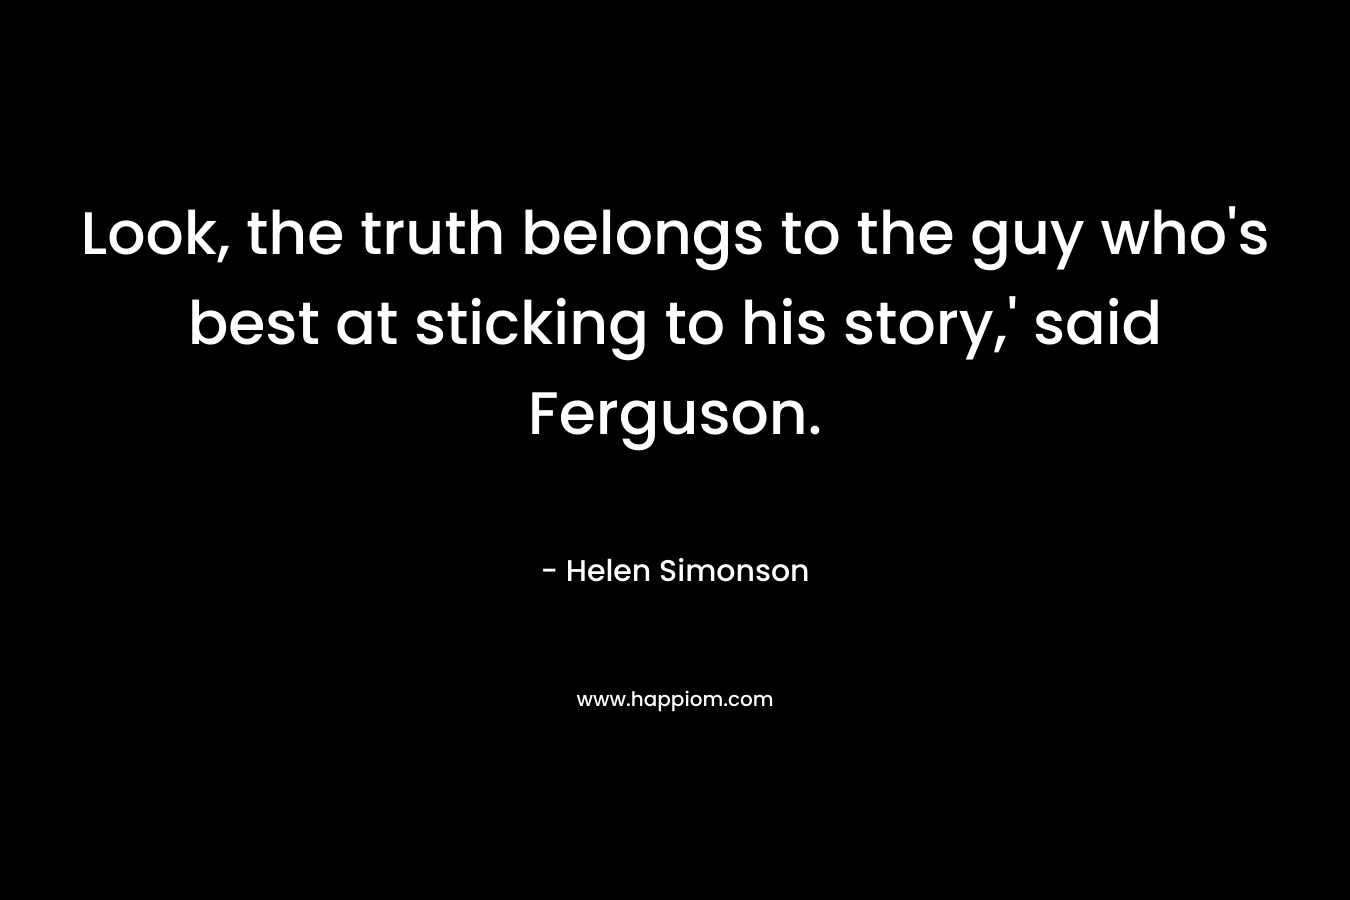 Look, the truth belongs to the guy who’s best at sticking to his story,’ said Ferguson. – Helen Simonson